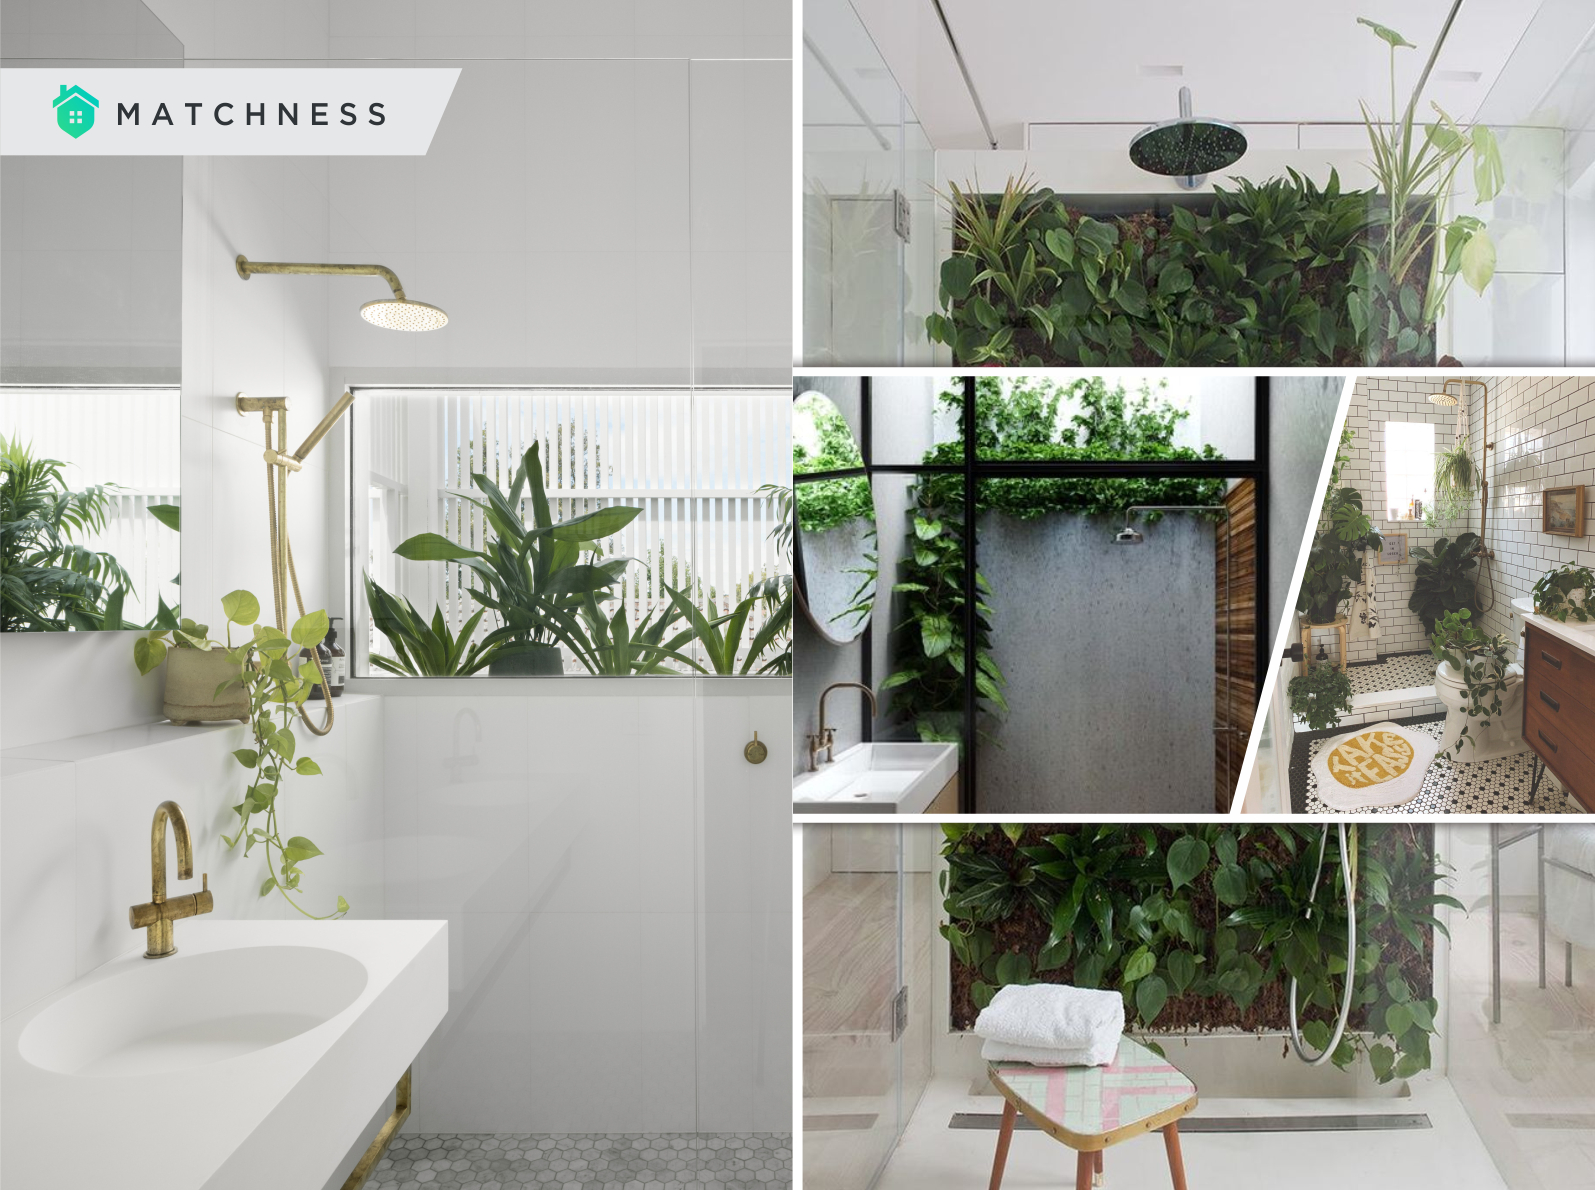 21 Ideas to Have the Shower Plants   Matchness.com